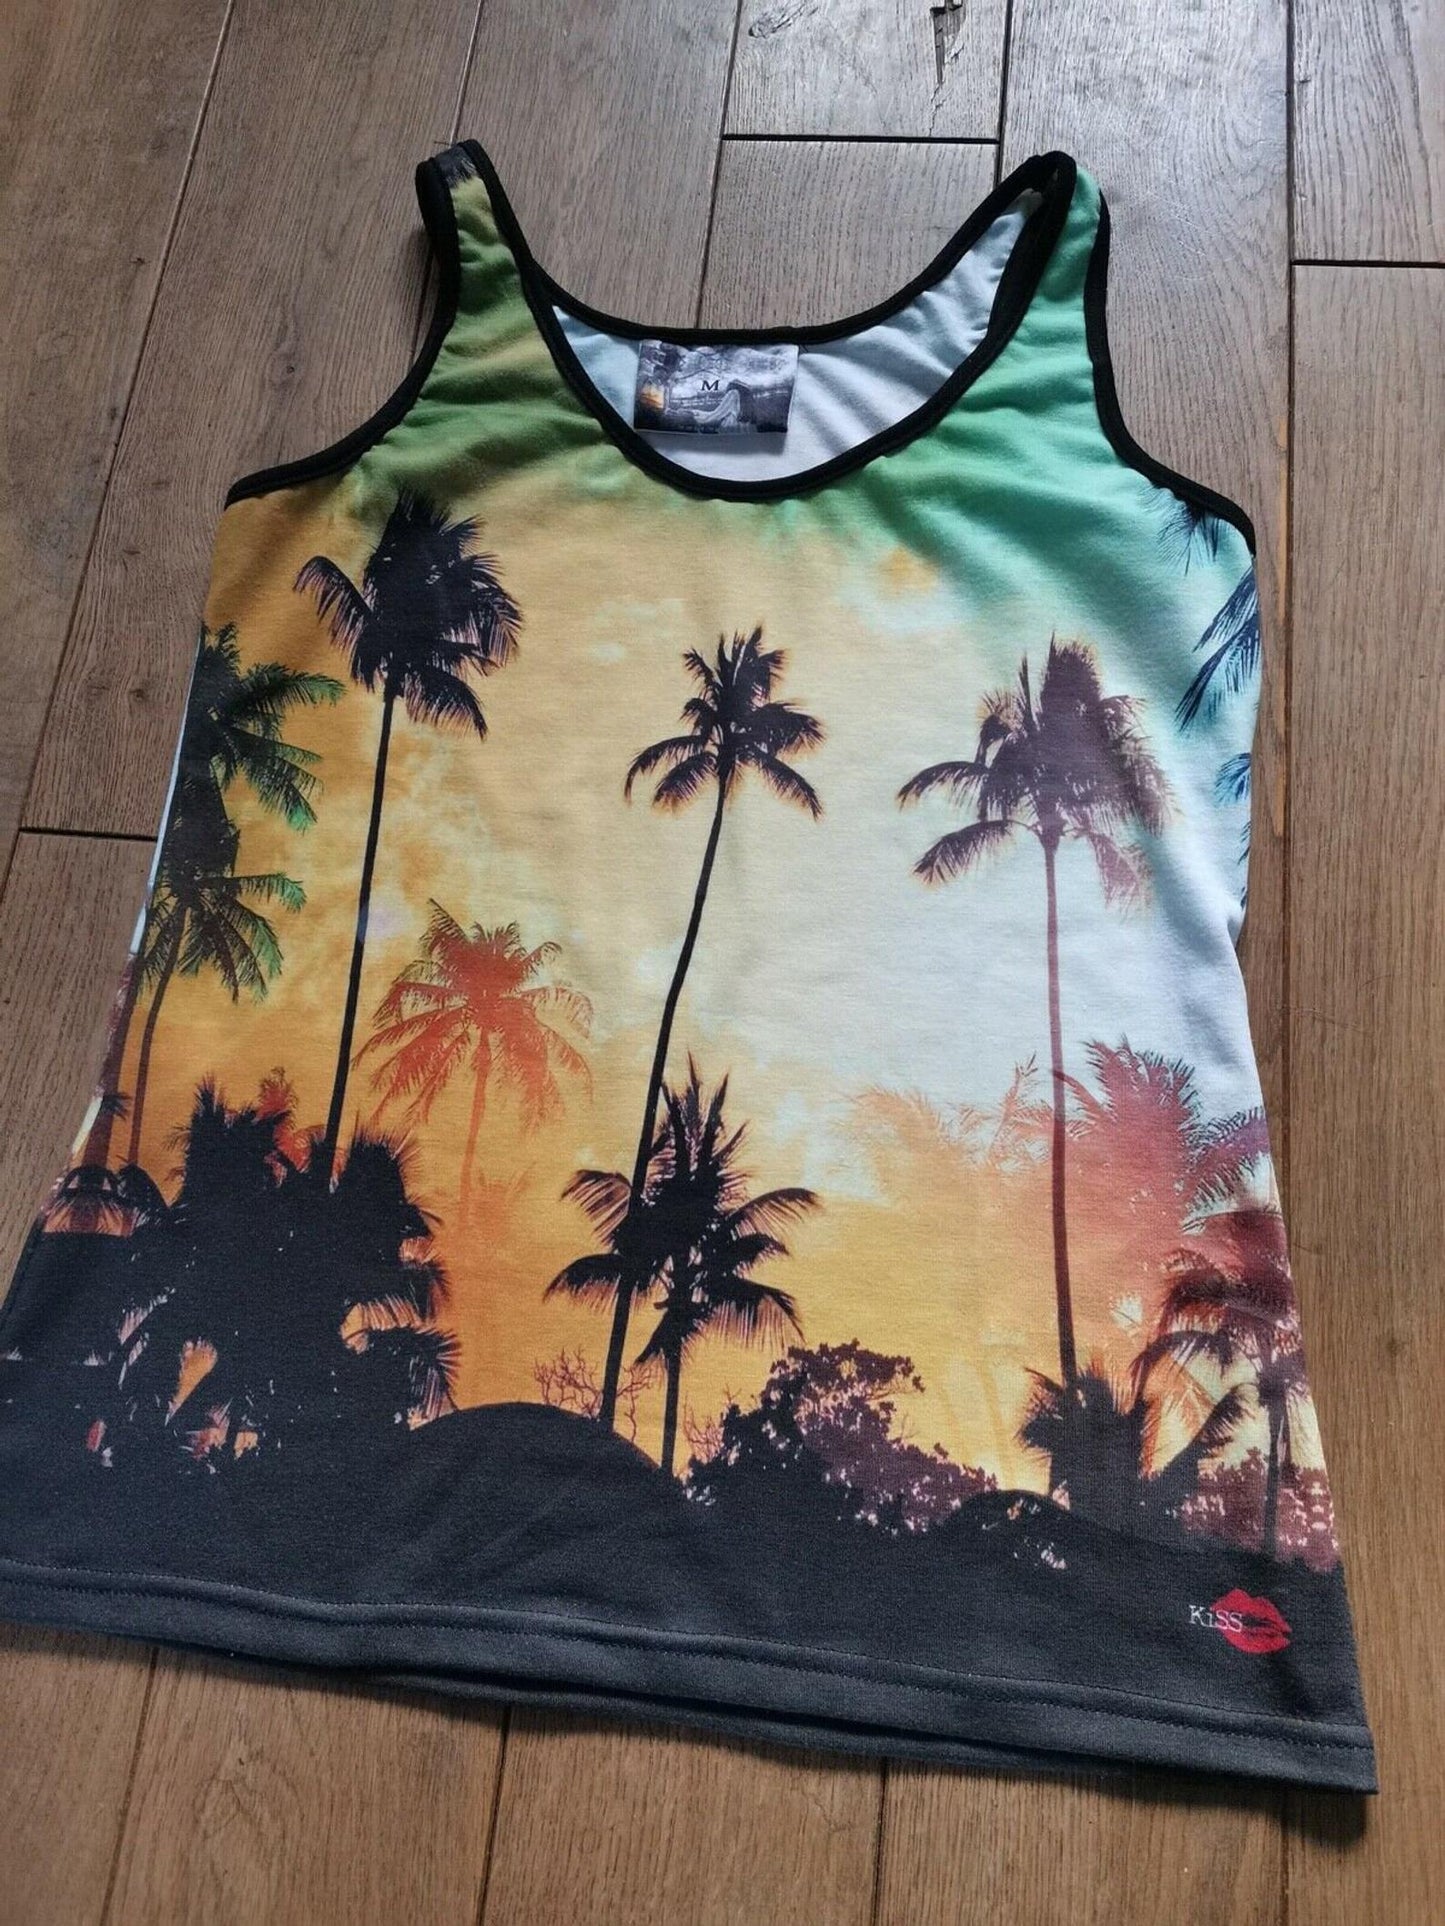 Klaus Sunset KiSS Women’s Fit  Vest - Palm Trees - Hargreeves  Robert Sheehan Inspired - Cosplay - Umbrella Academy - TV Show Number Four 4